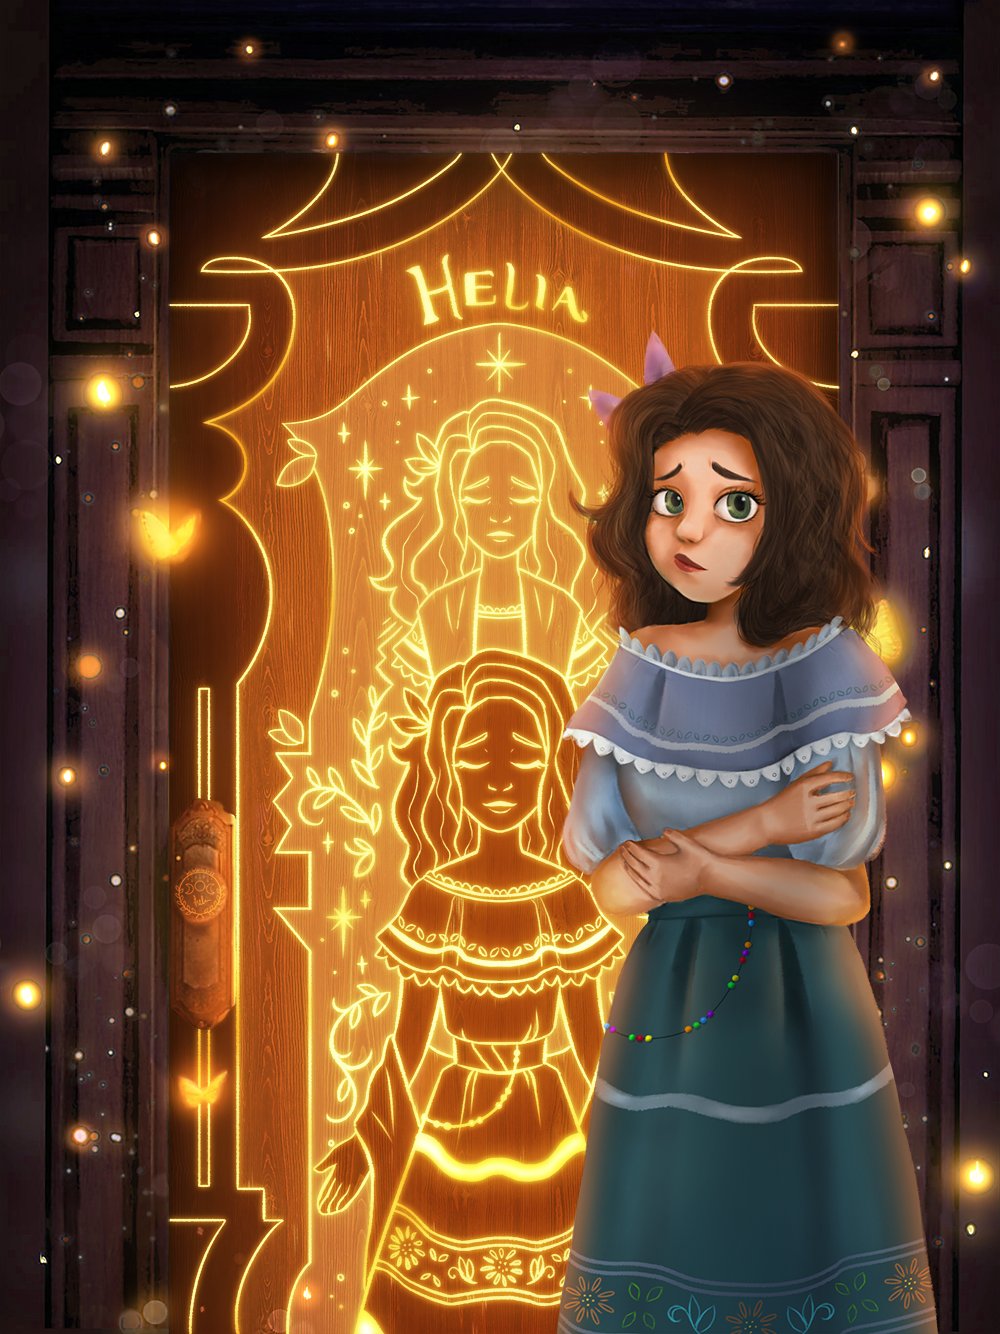 making my own doors character encanto｜TikTok Search